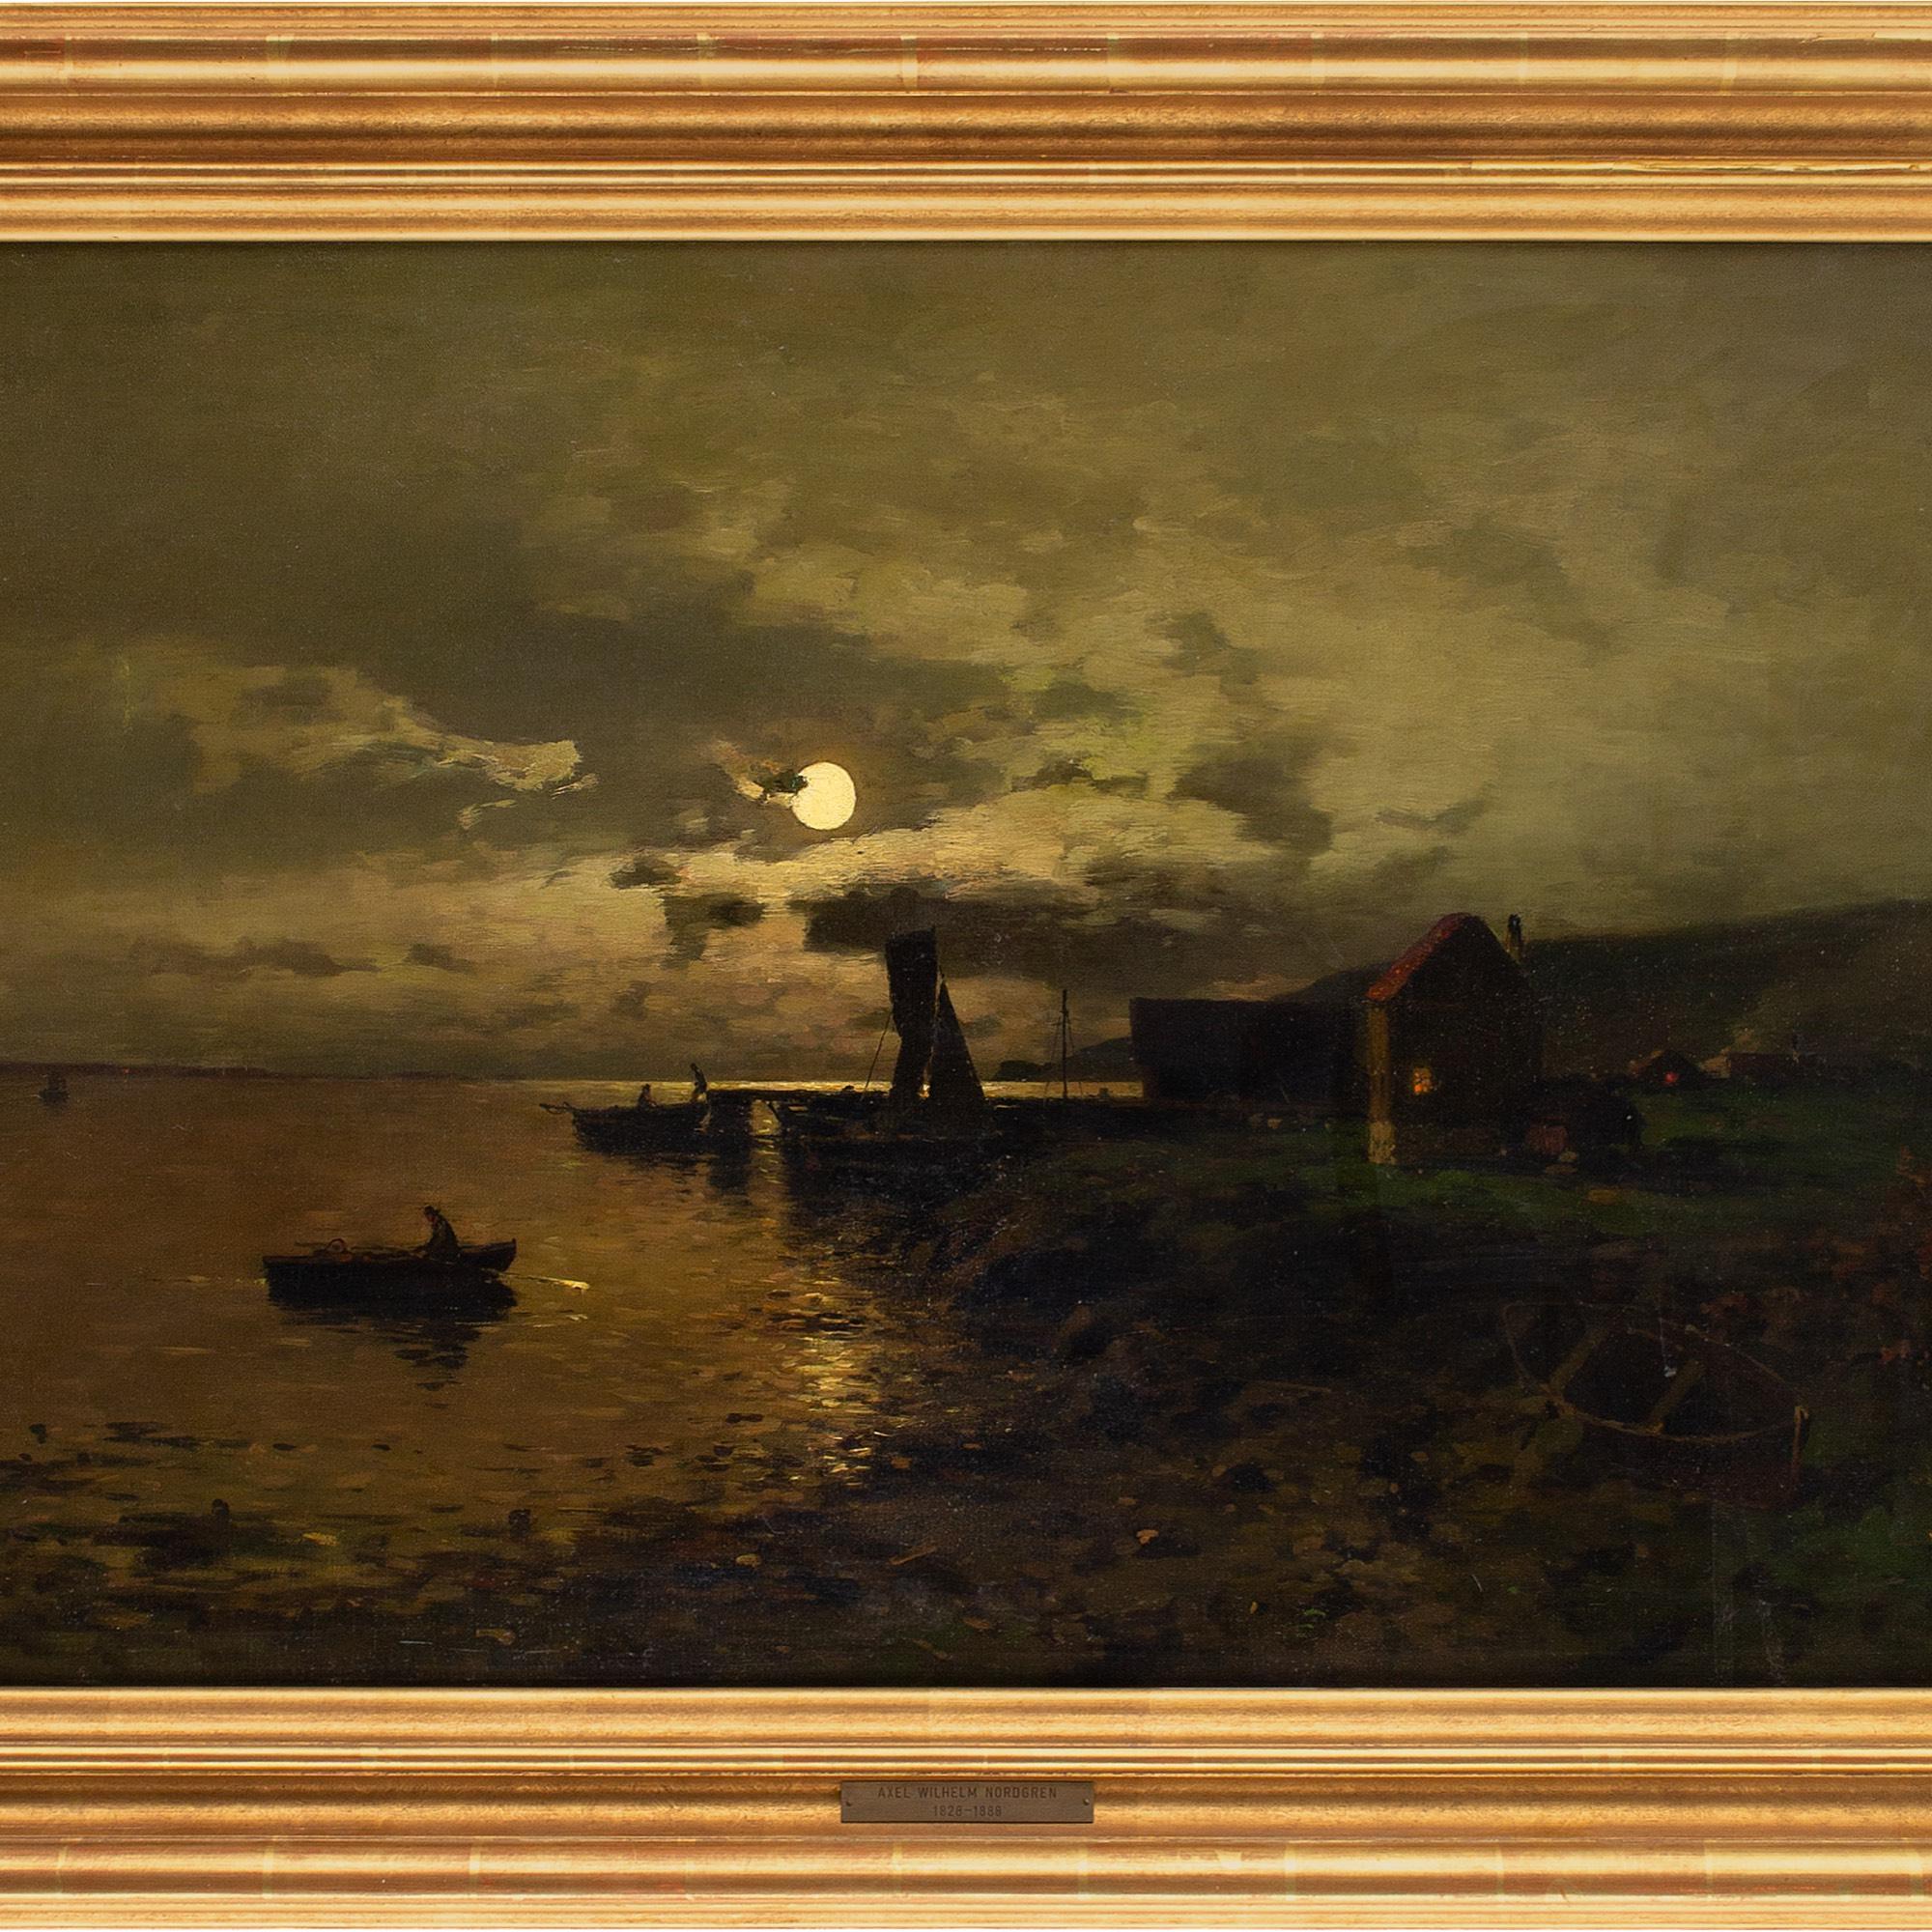 This 19th-century oil painting by Swedish artist Axel Nordgren (1828-1888) depicts a coastal scene under moonlight with cottages and small boats. It’s an accomplished work by a master of ‘mood painting’.

A calm serenade of peaceful tidal water